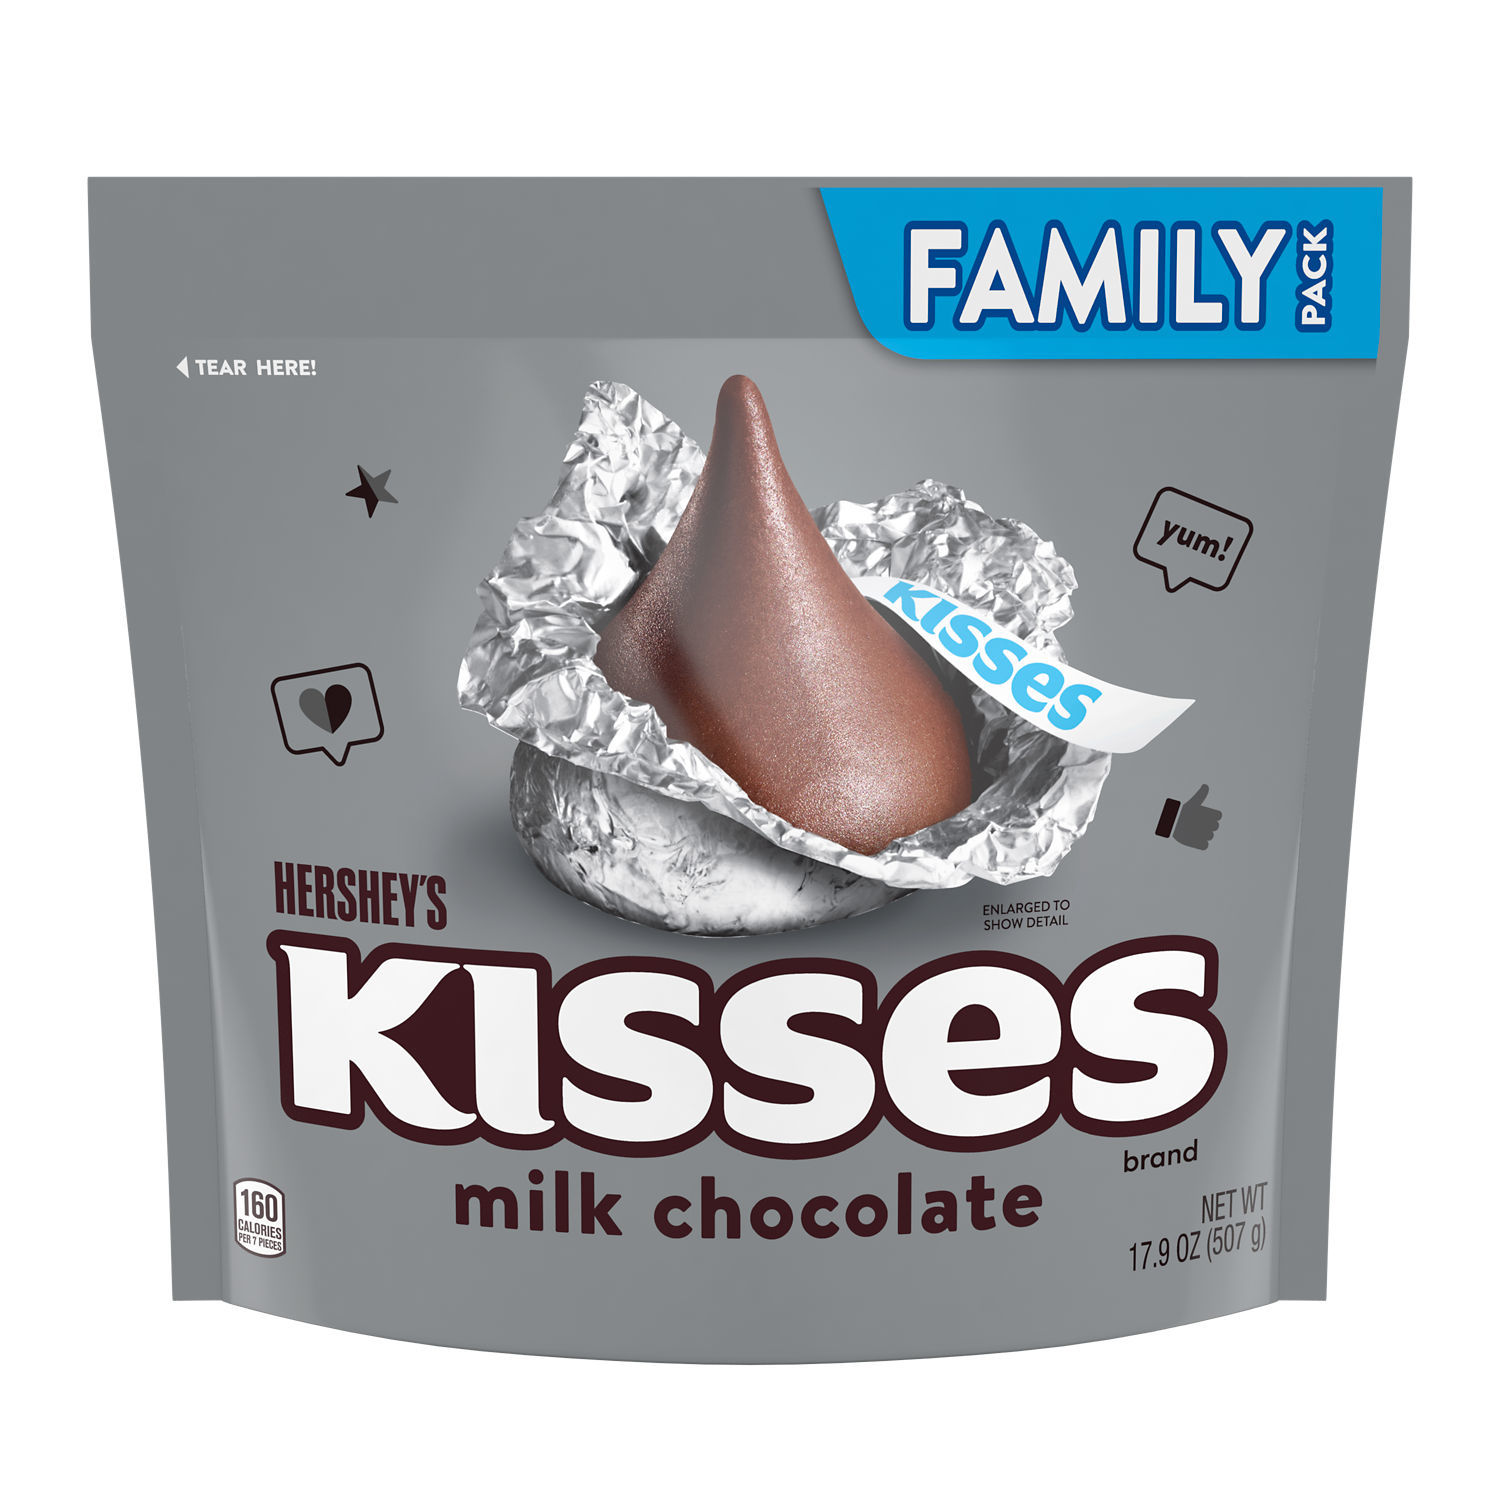 Hershey's Kisses Milk Chocolate Candy, Family Pack 17.9 oz - image 2 of 9